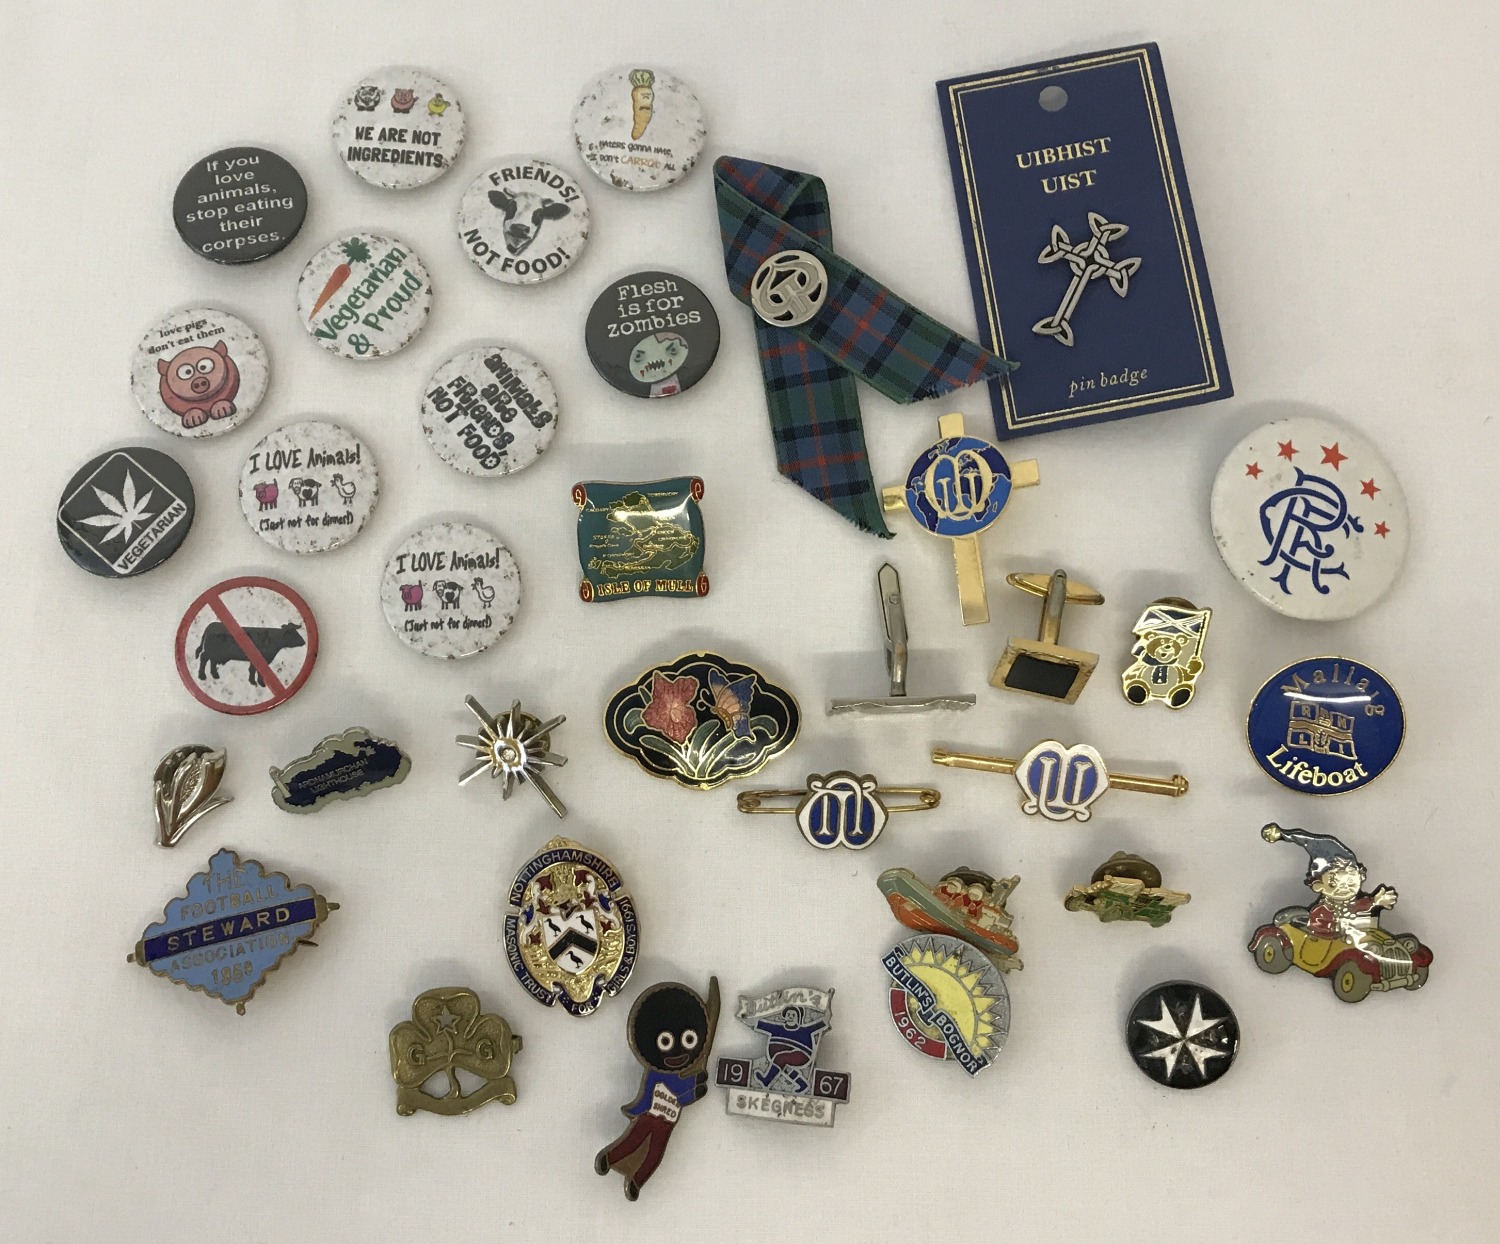 A collection of vintage and modern pin and button badges.